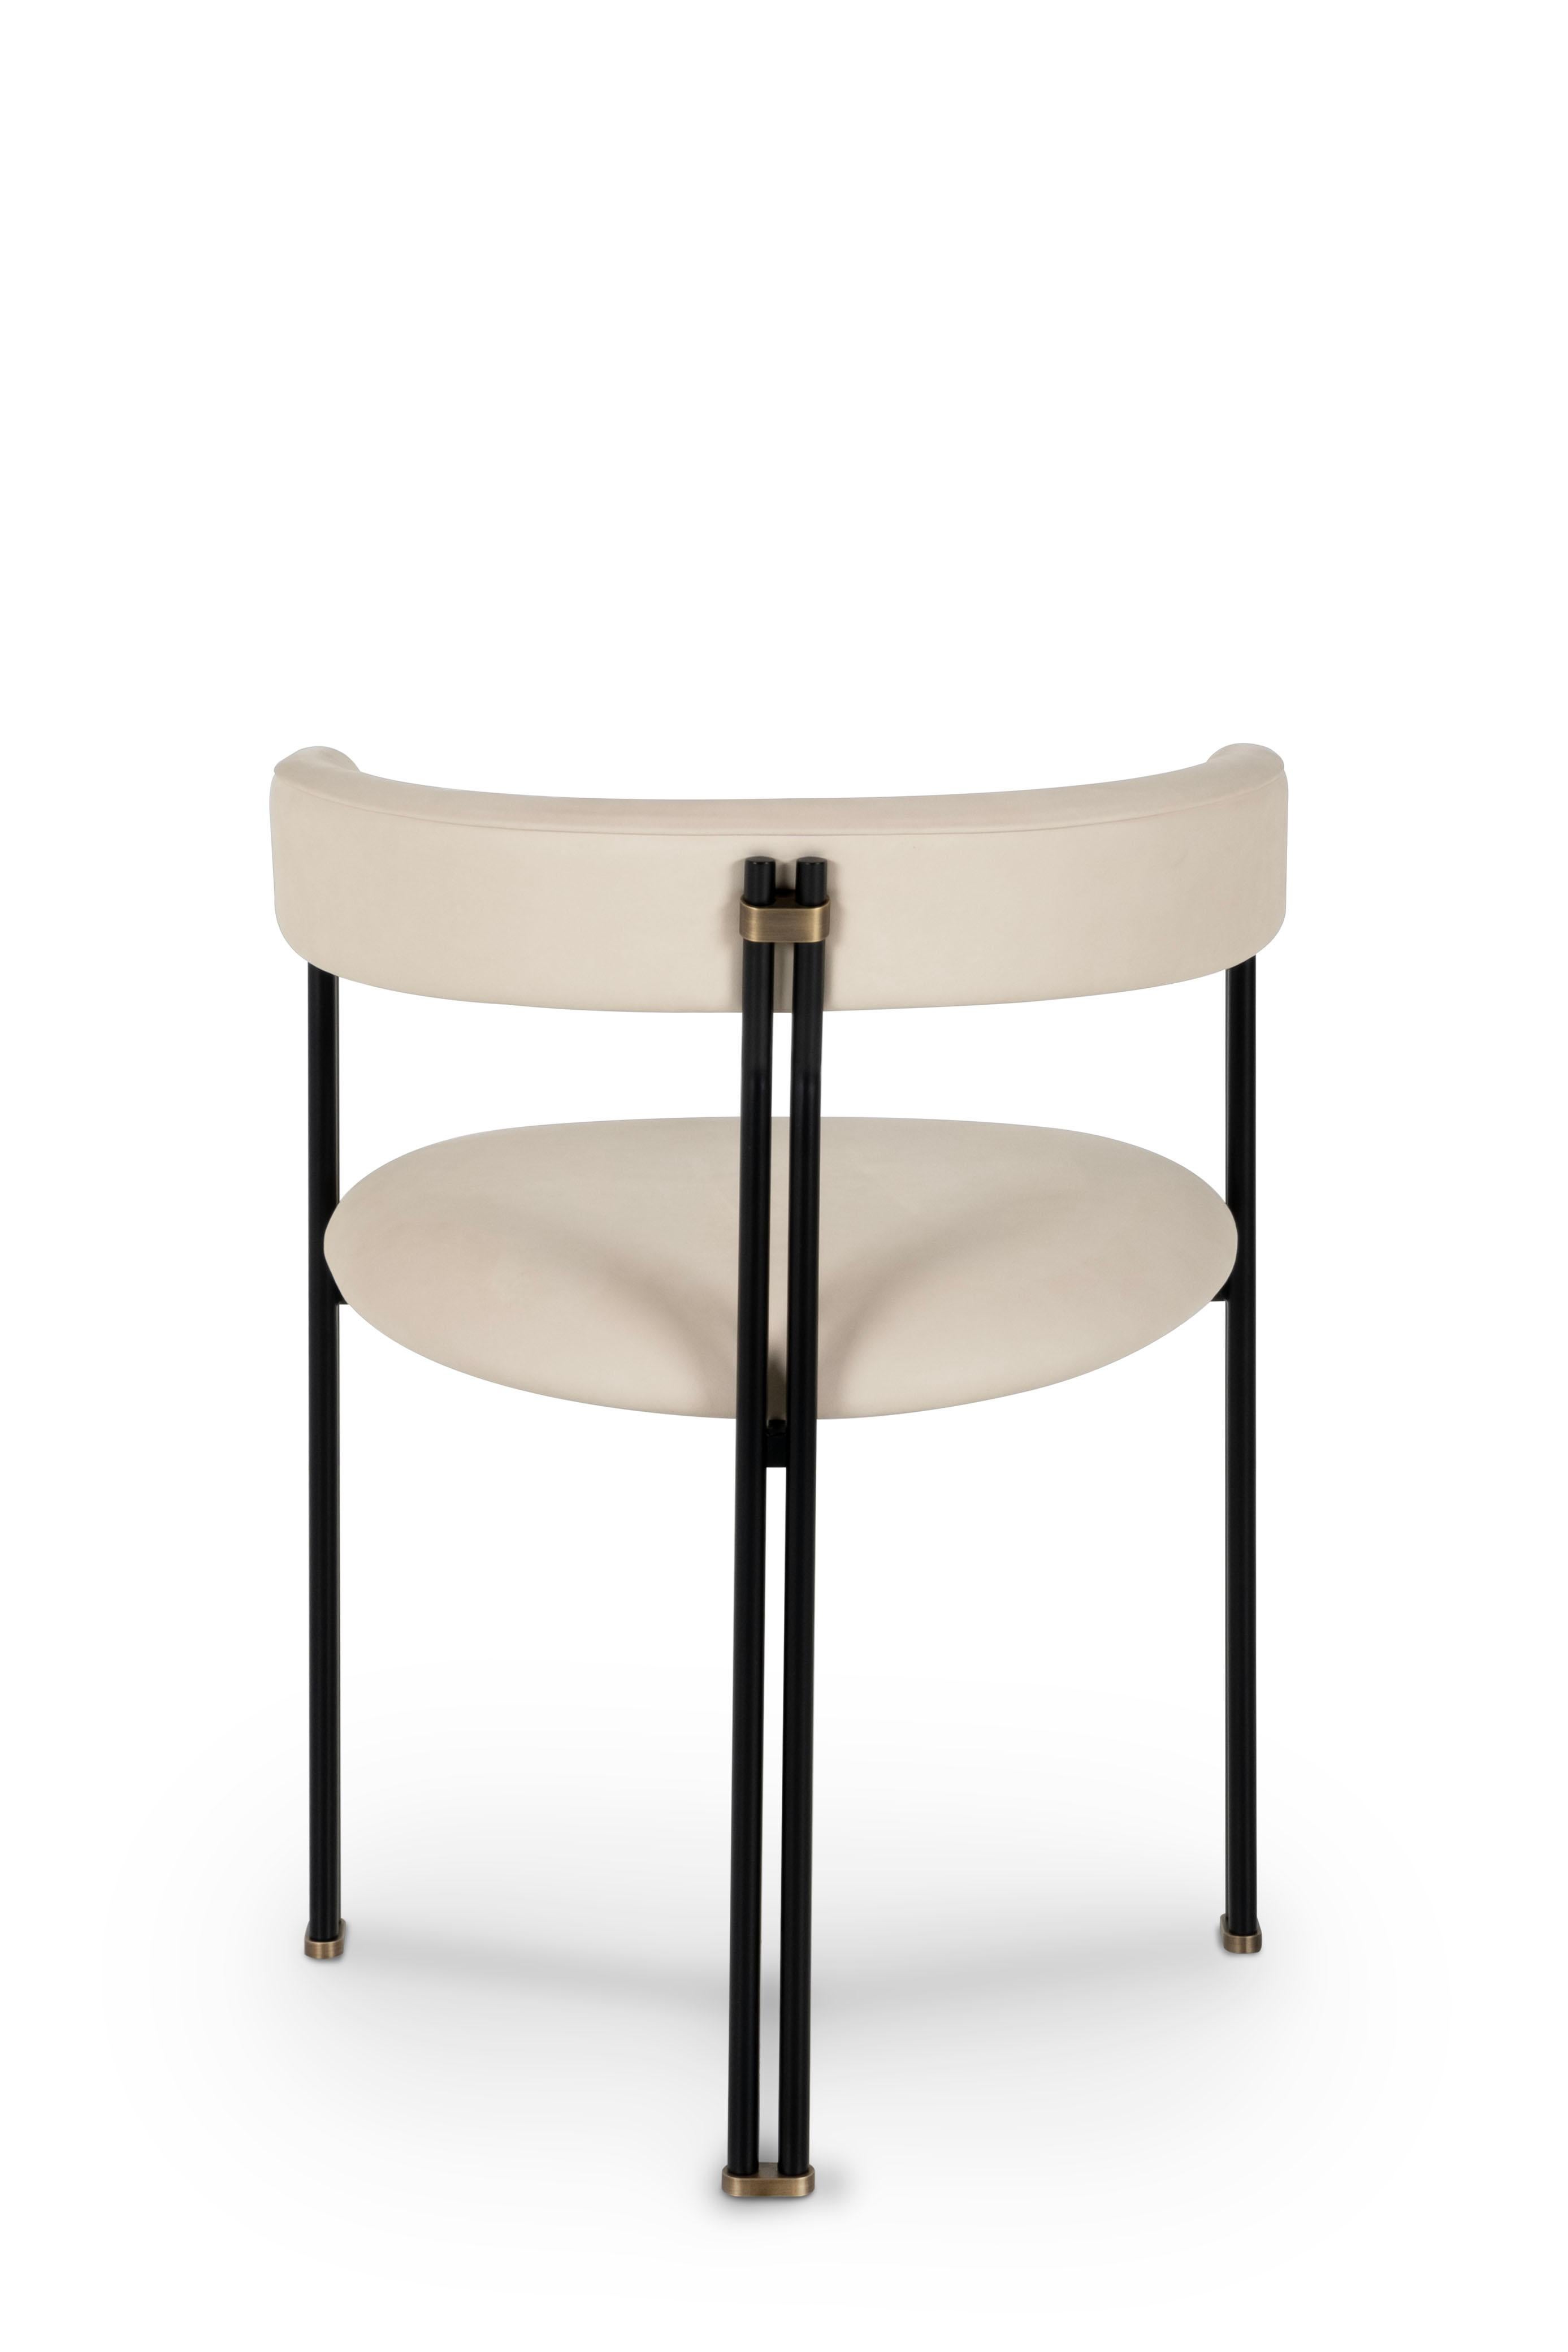 Metal Modern Maia Dining Chair, Beige Italian Leather, Handmade Portugal by Greenapple For Sale